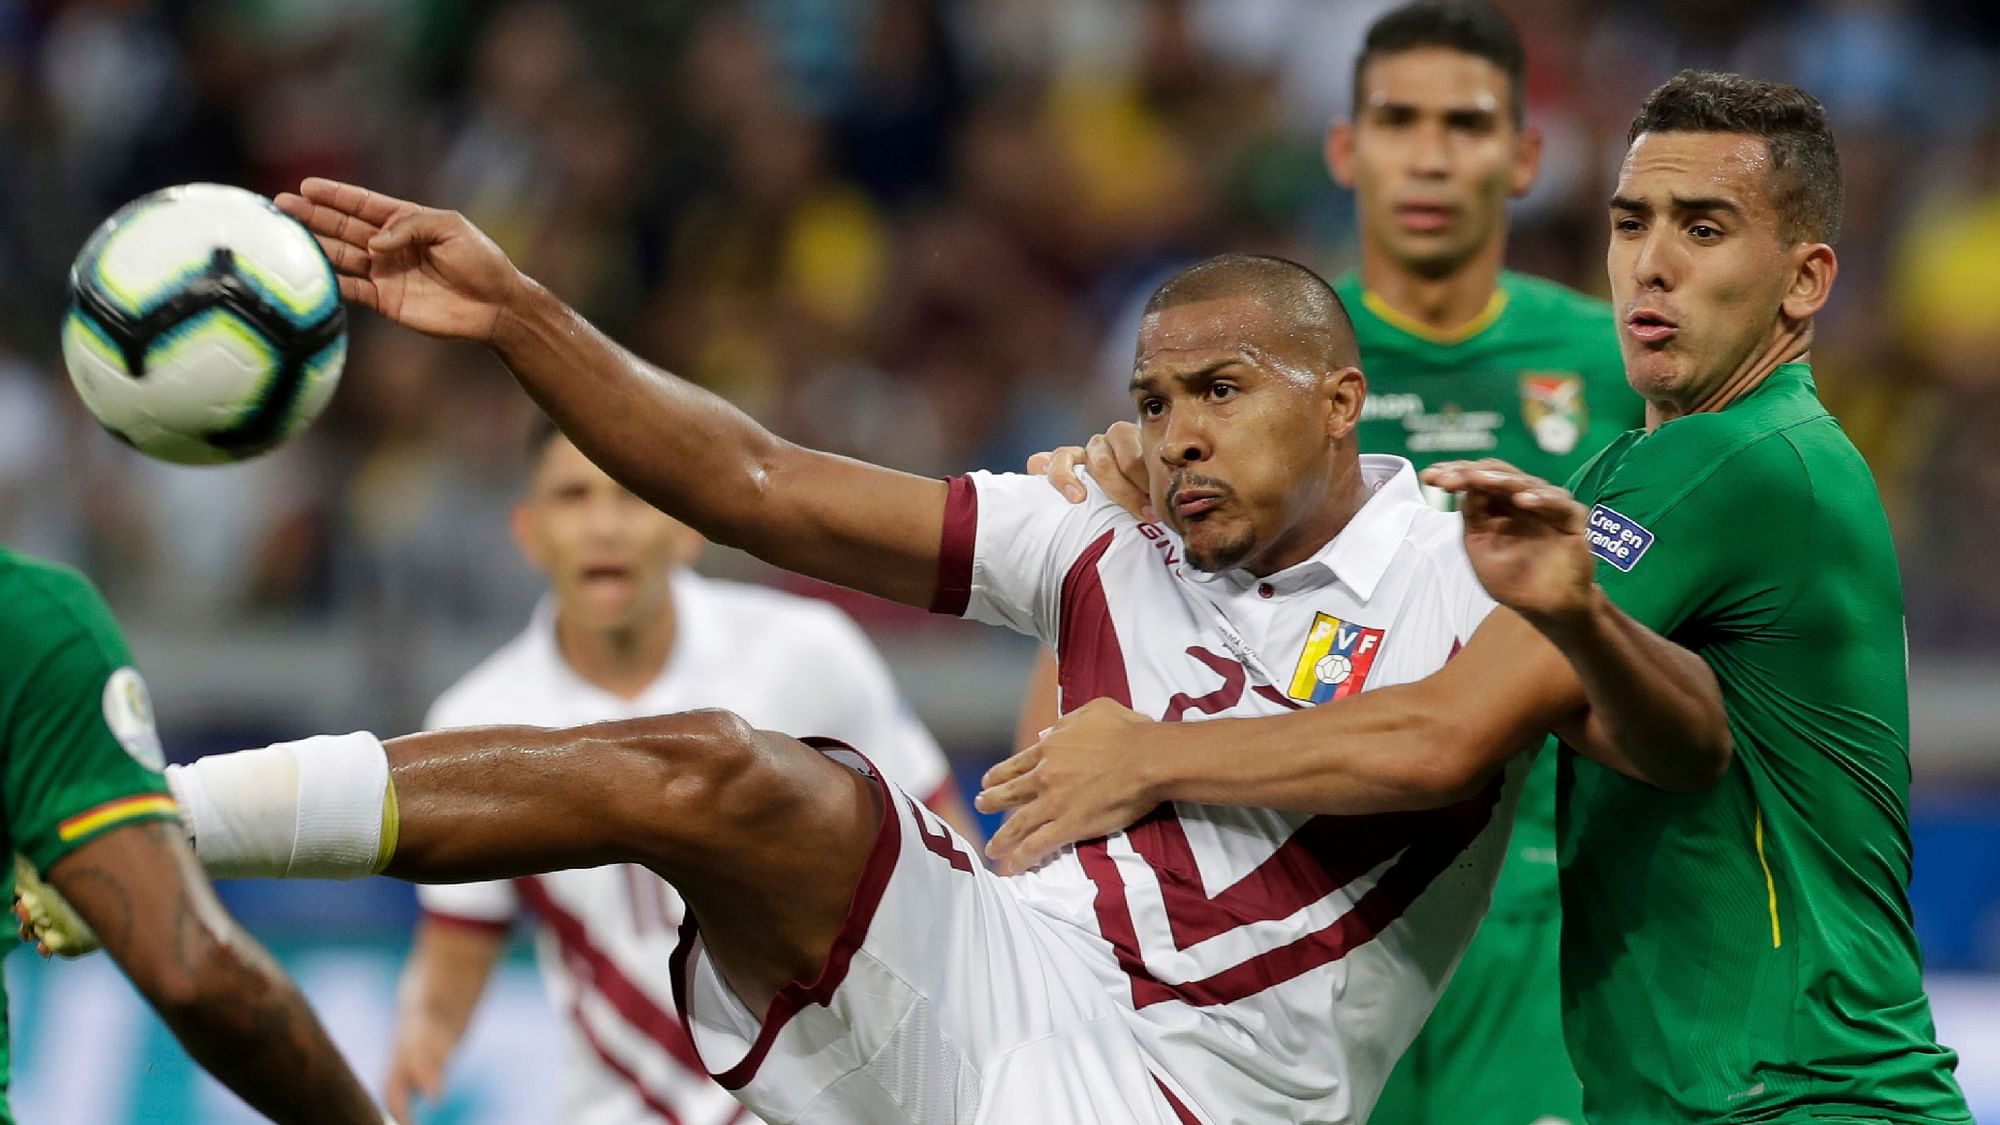 Venezuela’s Salomon Rondon, left, fights for the ball with Bolivia’s Marvin Bejarano during a Copa America Group A soccer match at Mineirao stadium in Belo Horizonte, Brazil.